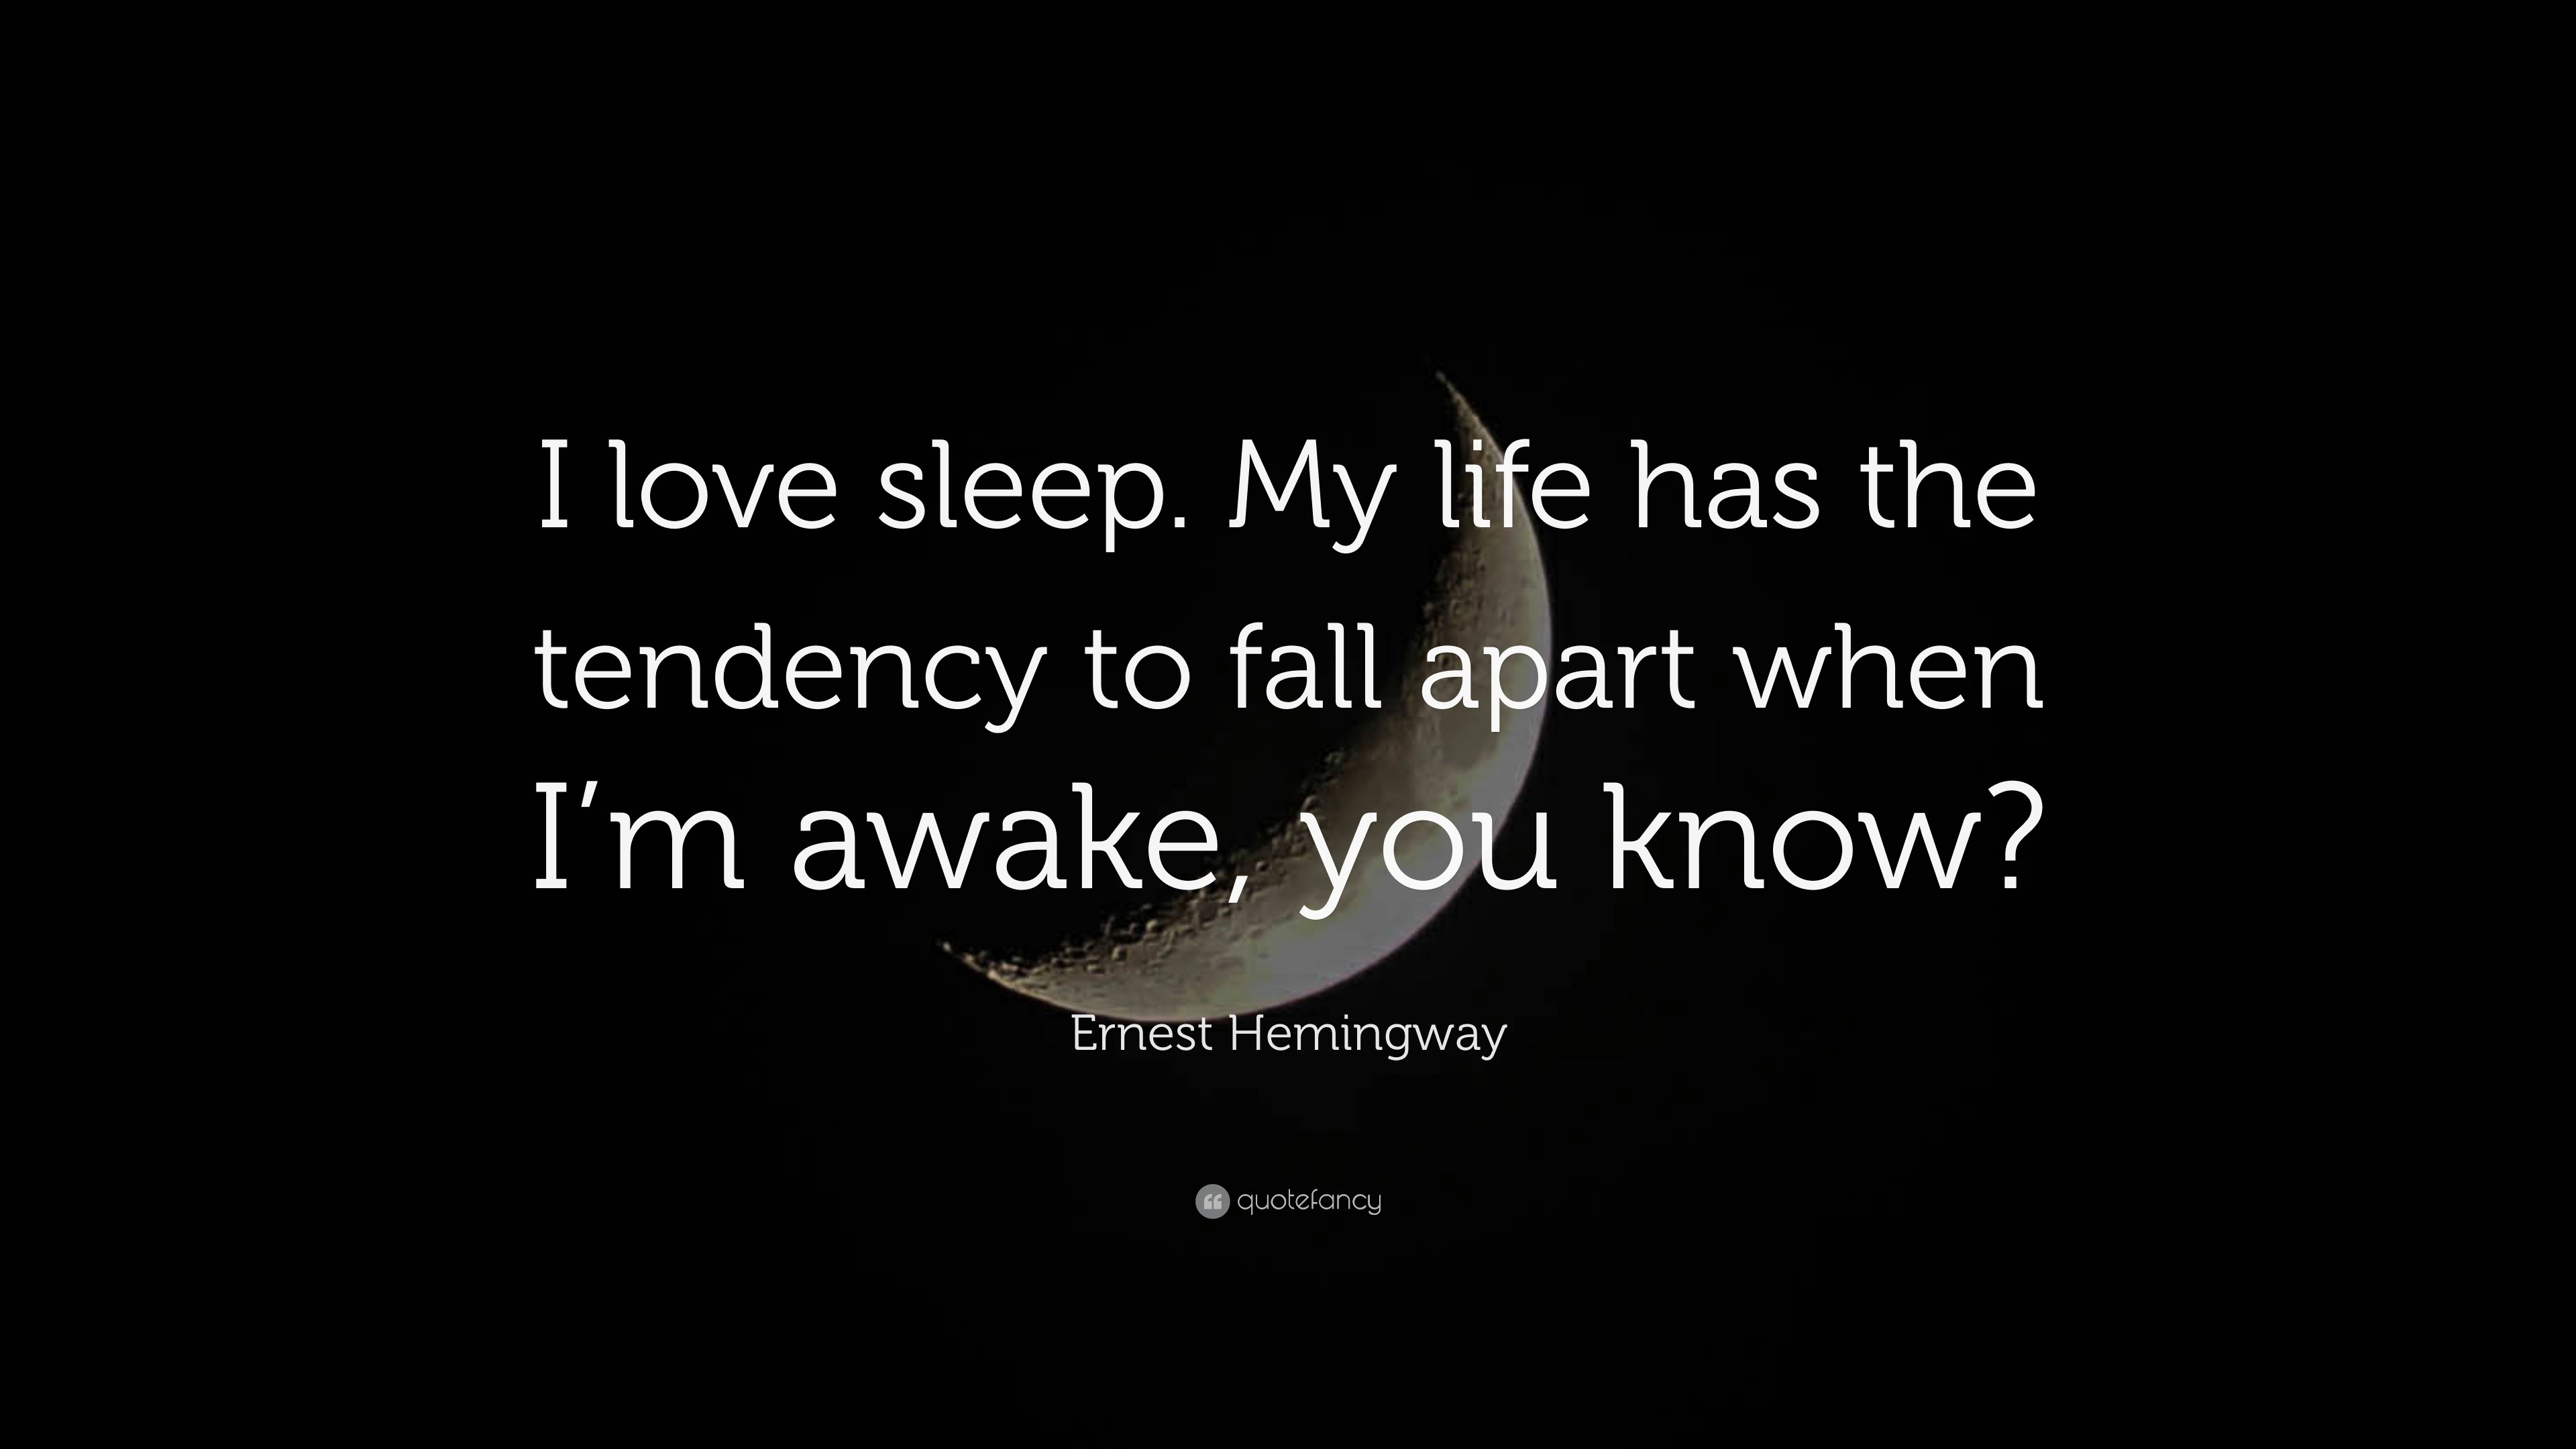 Ernest Hemingway Quote “I love sleep My life has the tendency to fall